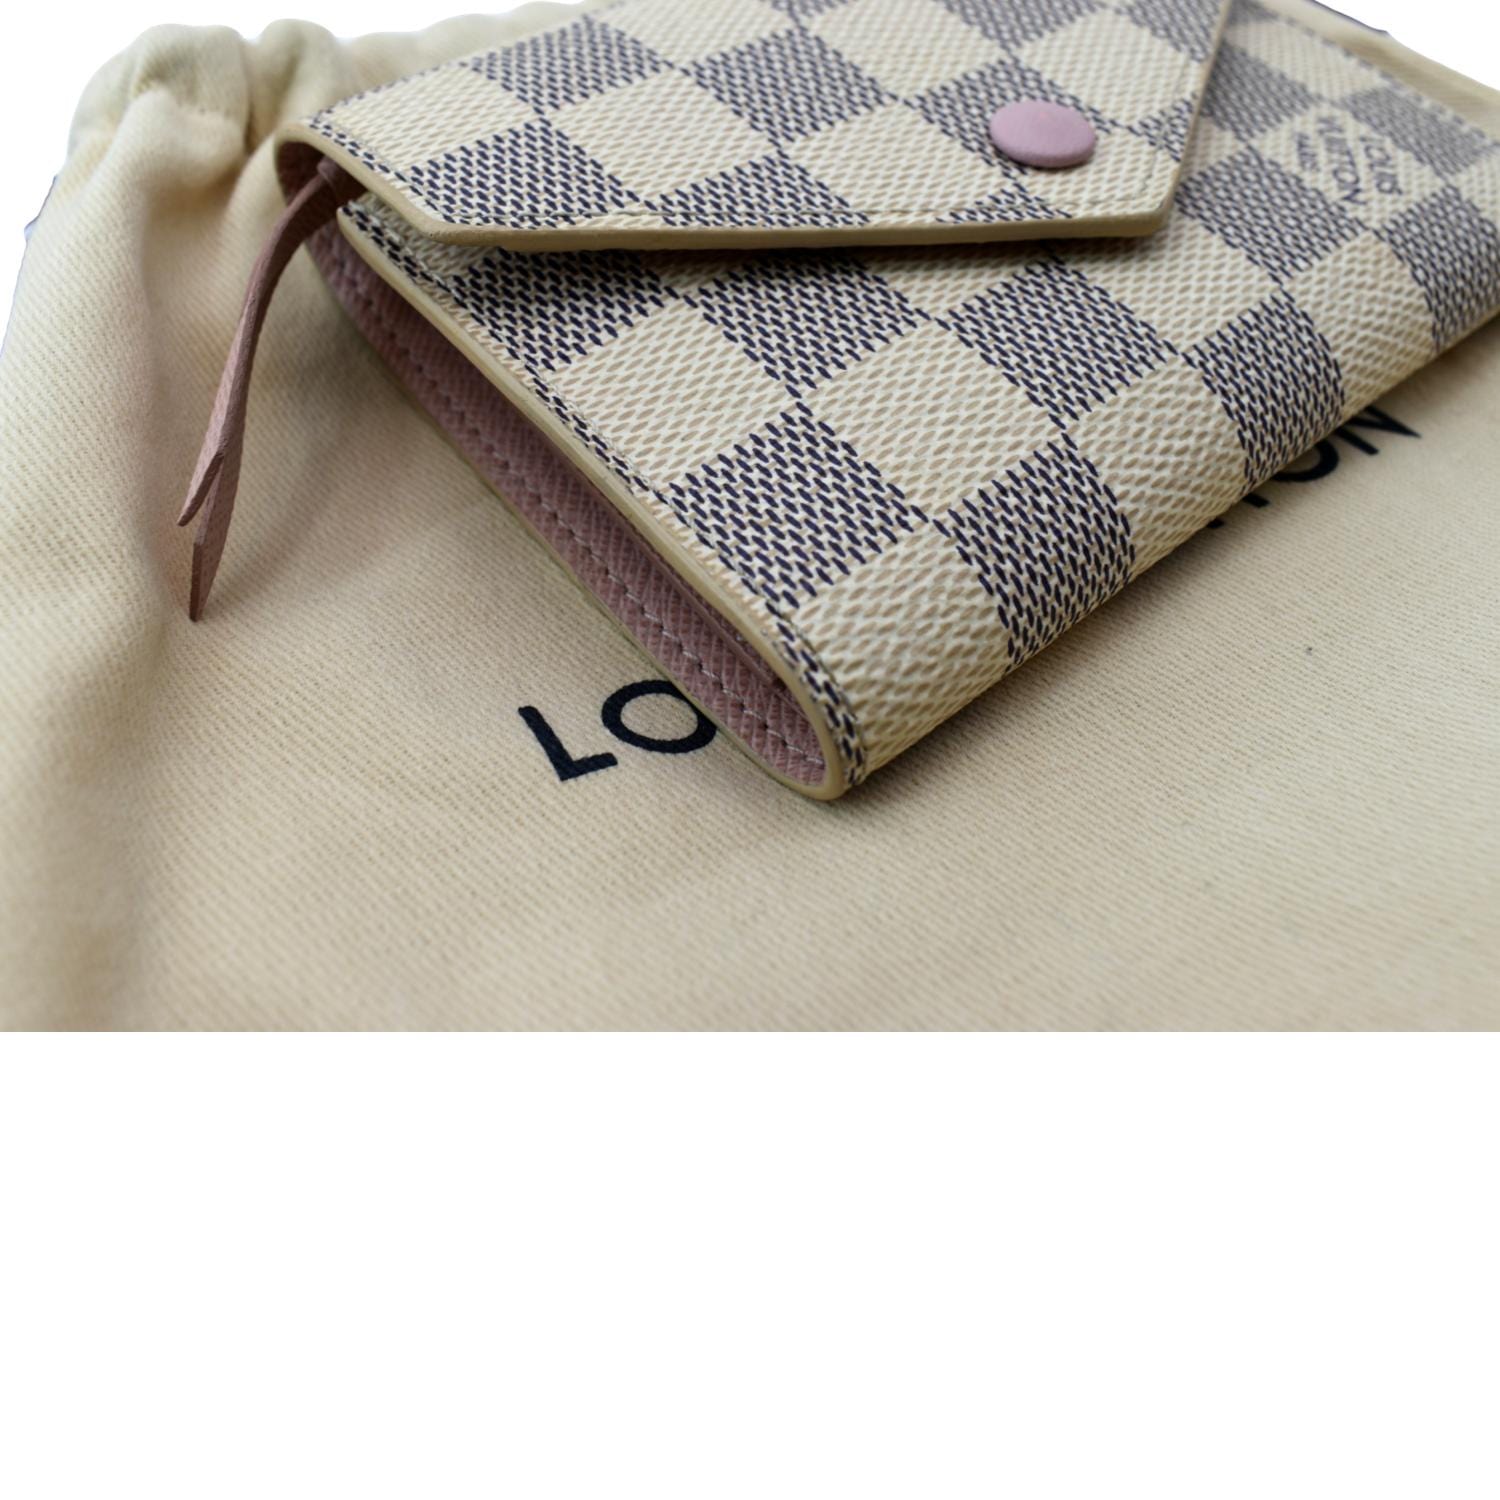 Victorine Wallet Damier Azur Canvas - Wallets and Small Leather Goods